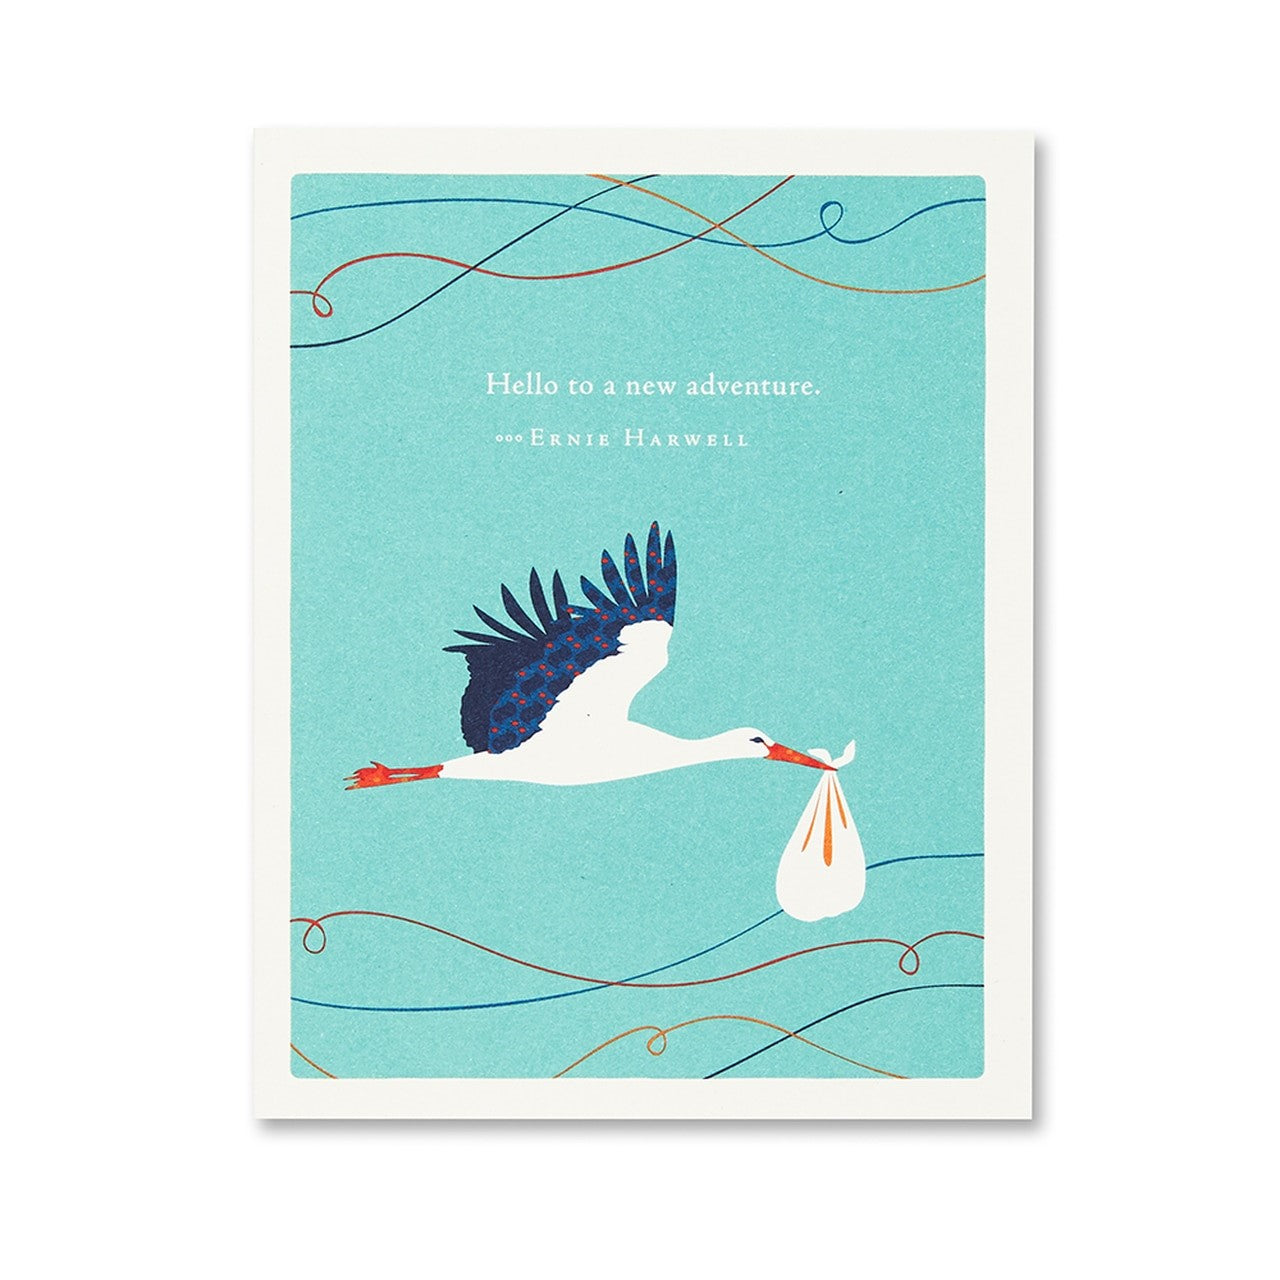 front of card is a stork carrying a cloth sack and text